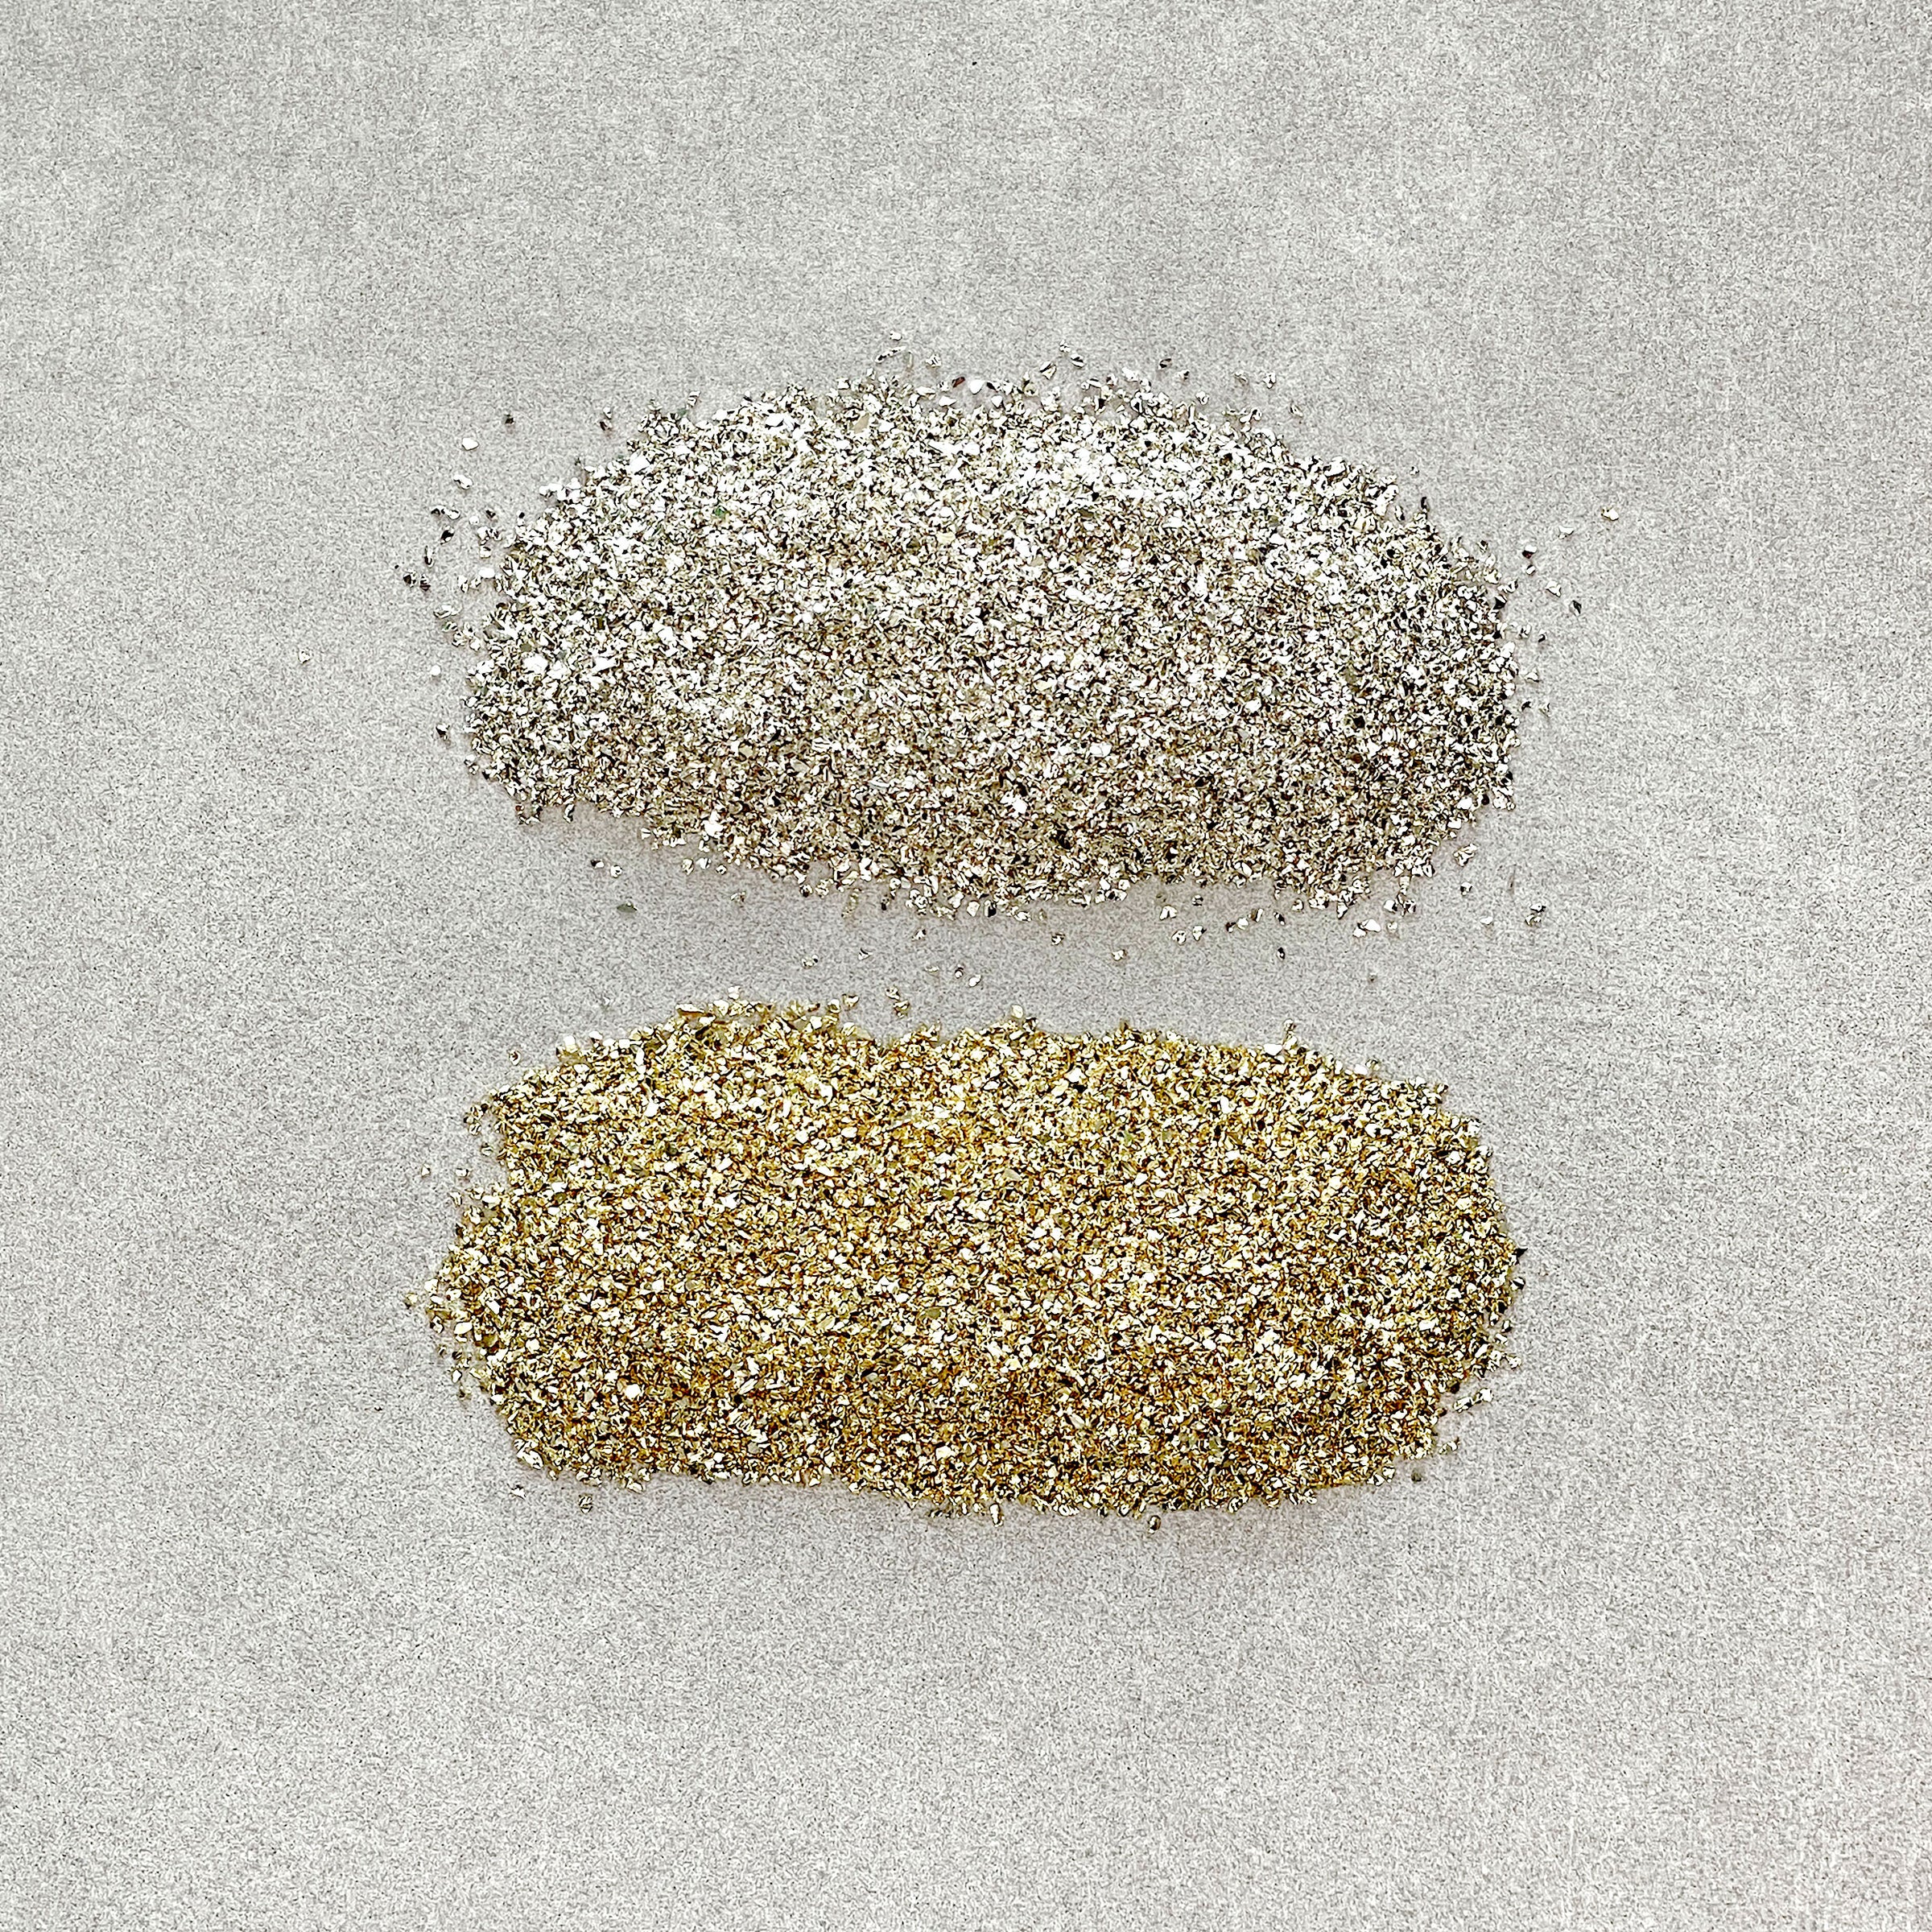 Gold metallic crushed glass for crafts- 8oz